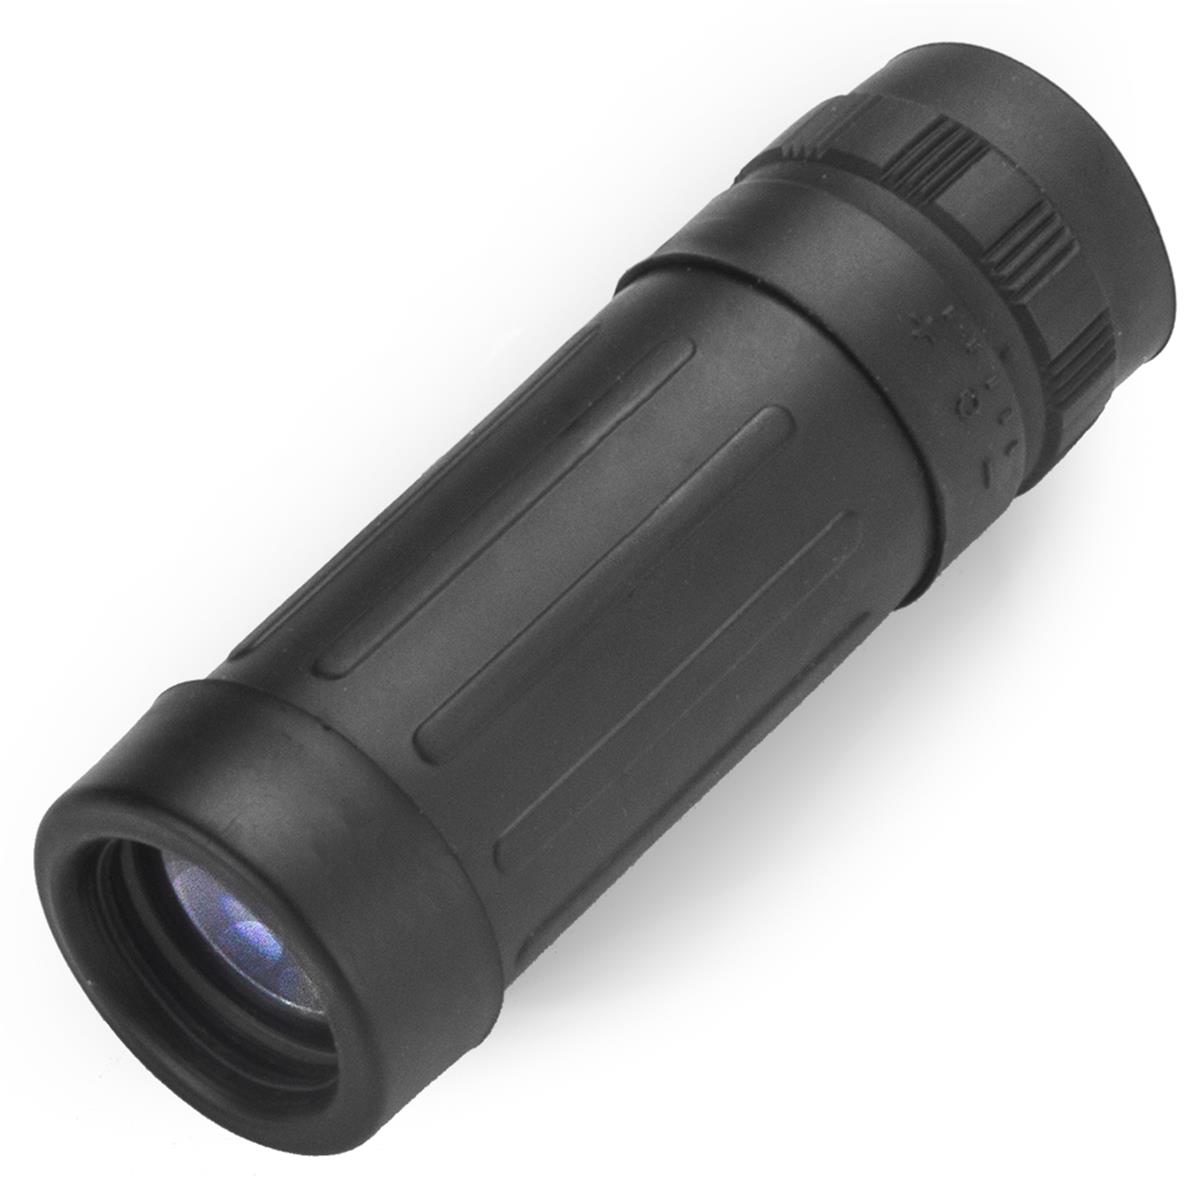 Picture of Brybelly SOEQ-004 Compact Pocket 8 x 21 Monocular